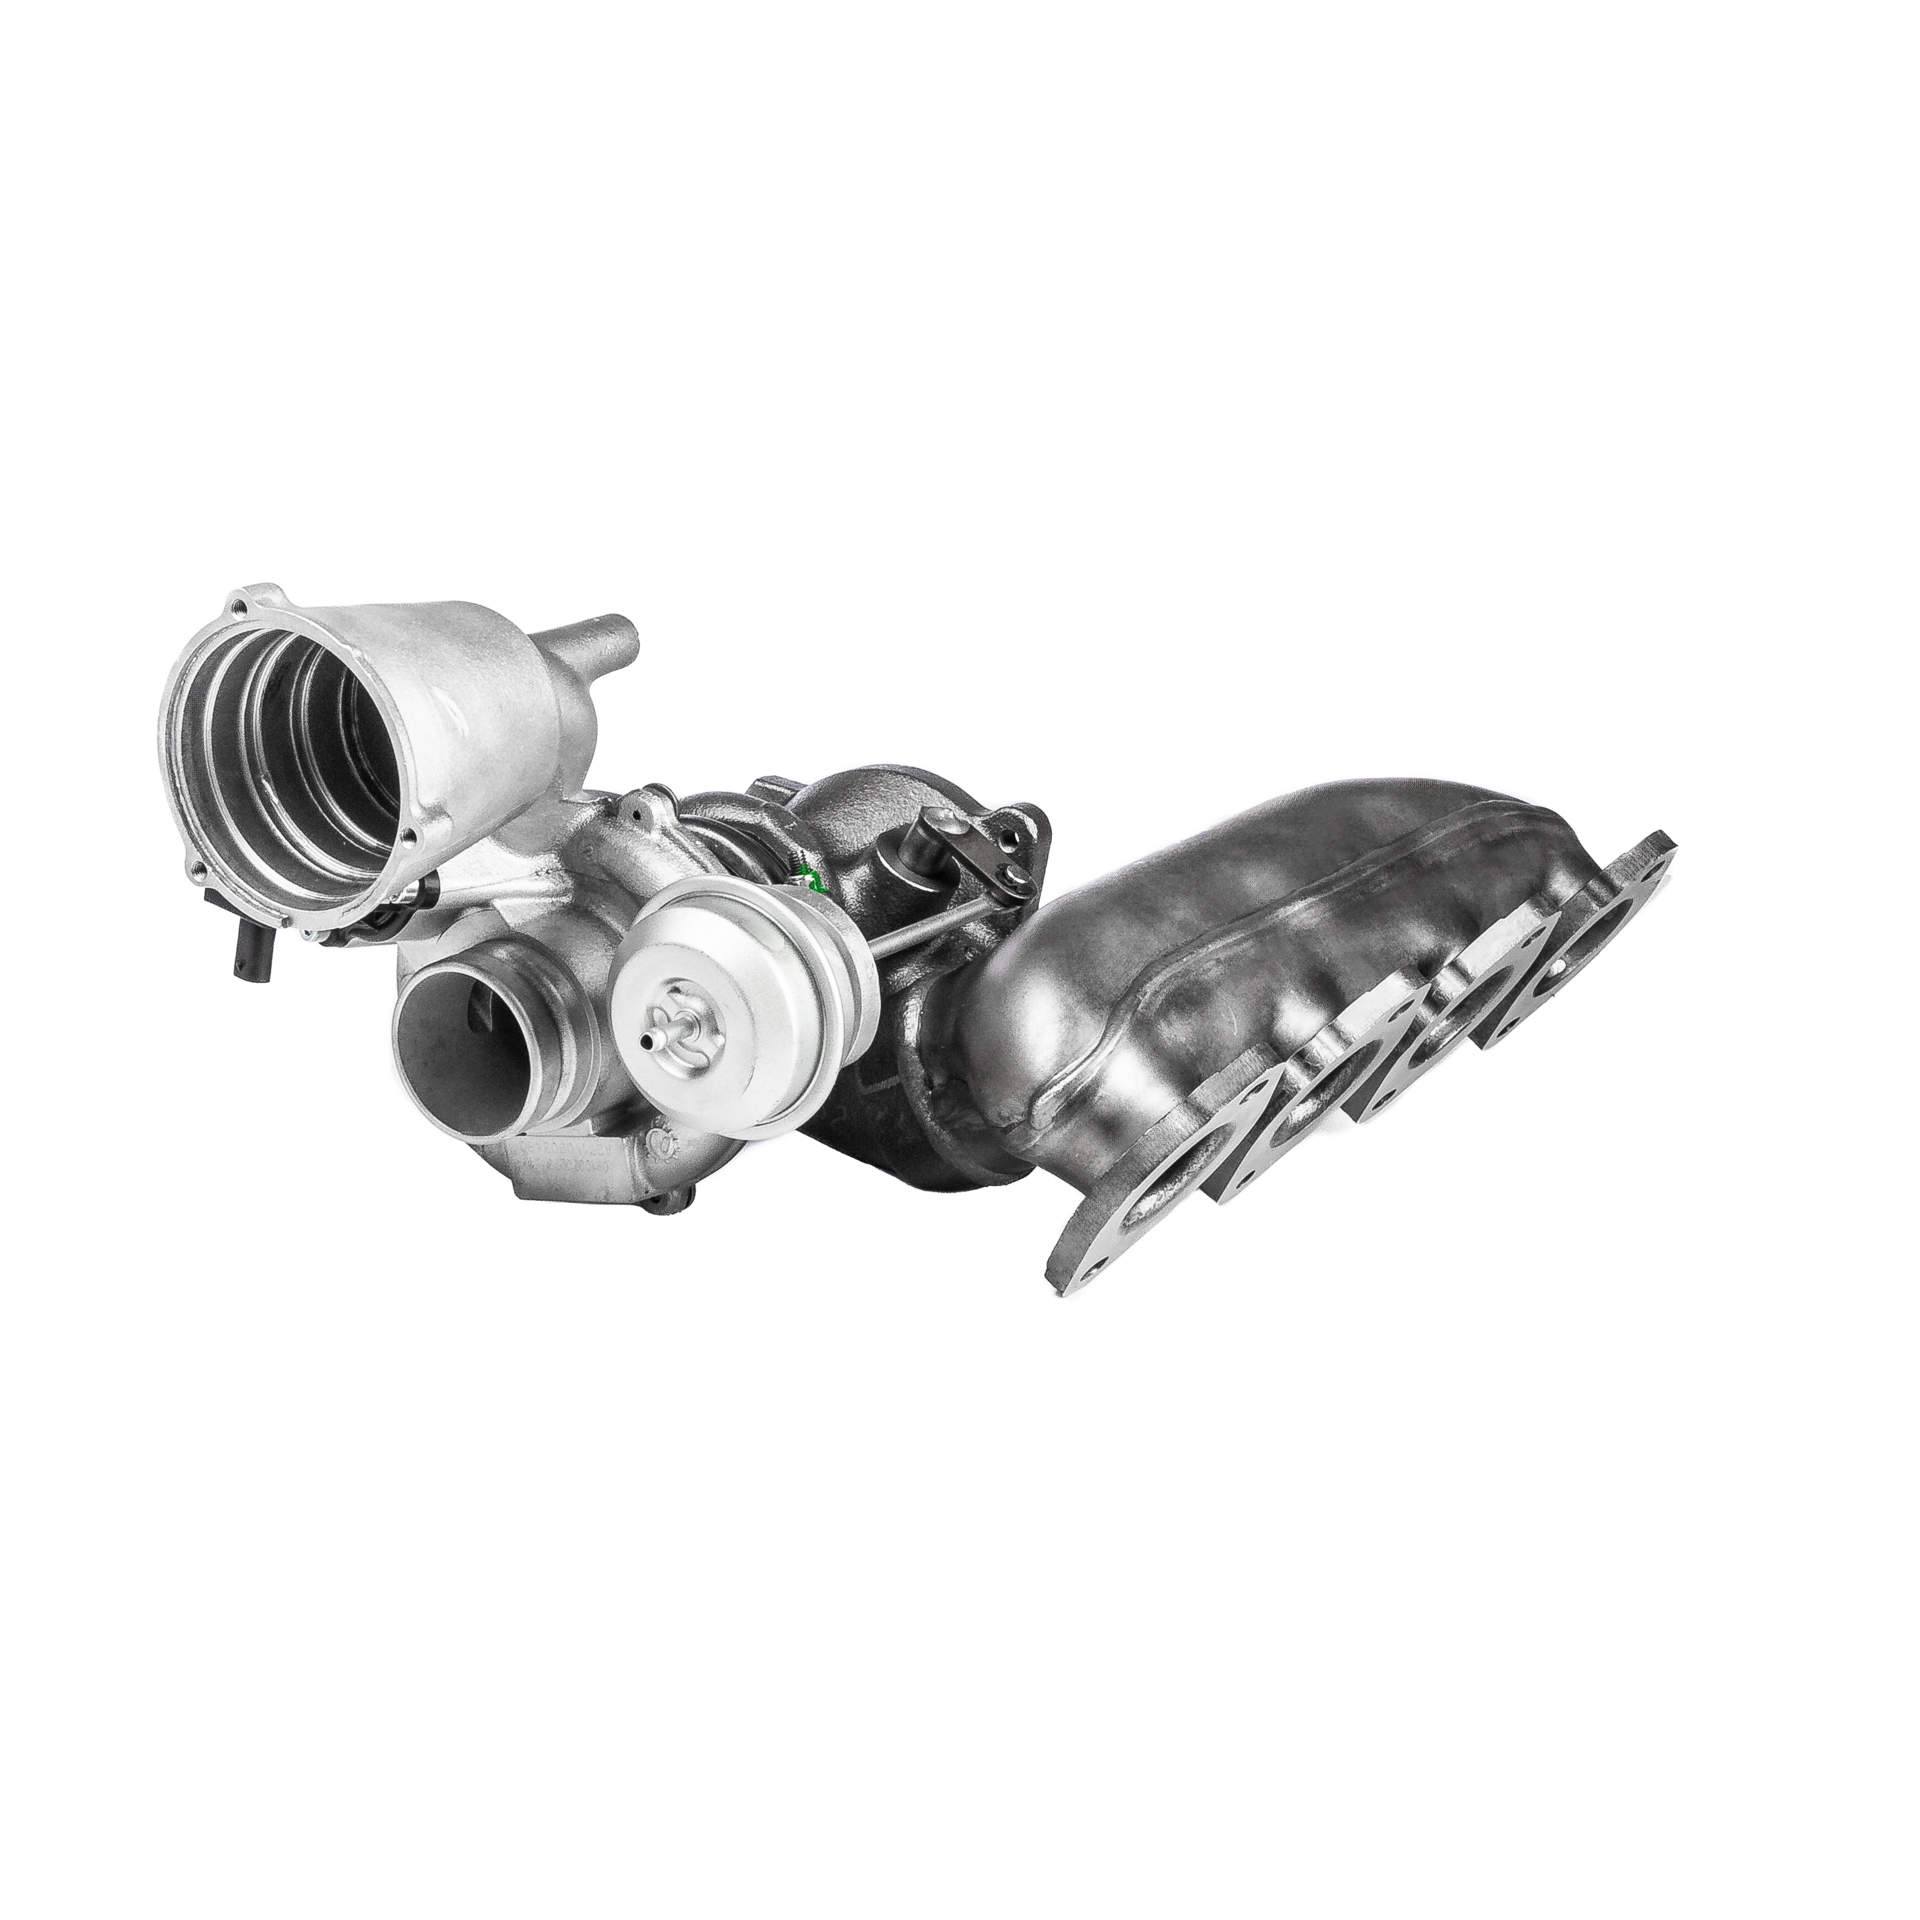 A2710903480RS BR Turbo Turbocharger - buy online